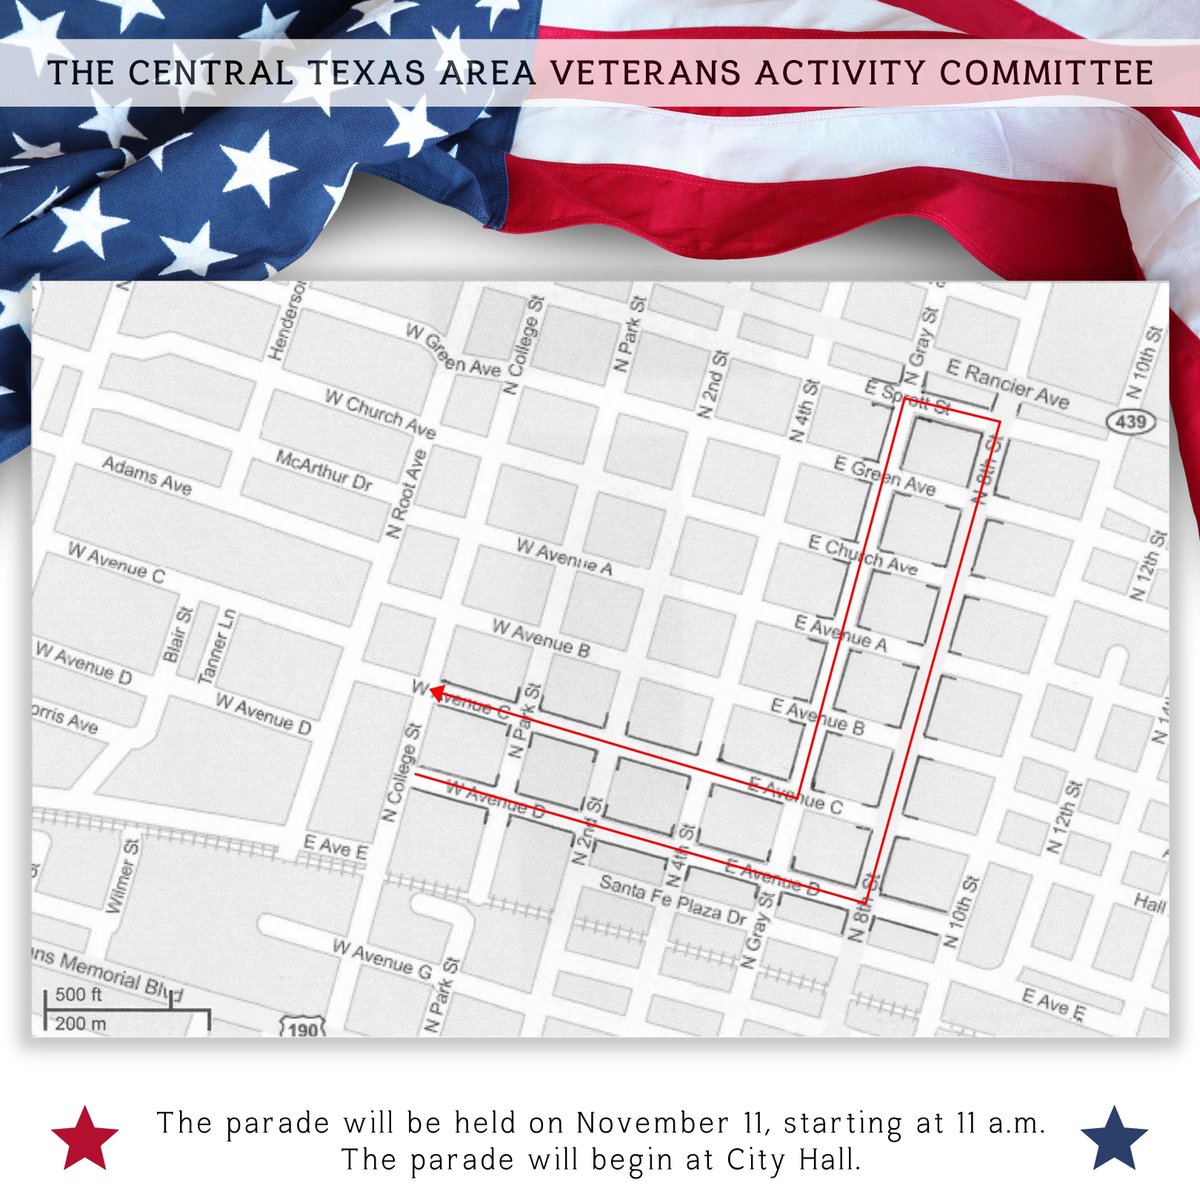 The Killeen Veterans Day Parade will be held on Nov. 11 starting at 11 a.m. Prior to the parade, Mayor Debbie Nash-King will receive a certificate of recognition from the Department of Veterans Affairs as Killeen has been designated a site for the Veterans Day celebration.